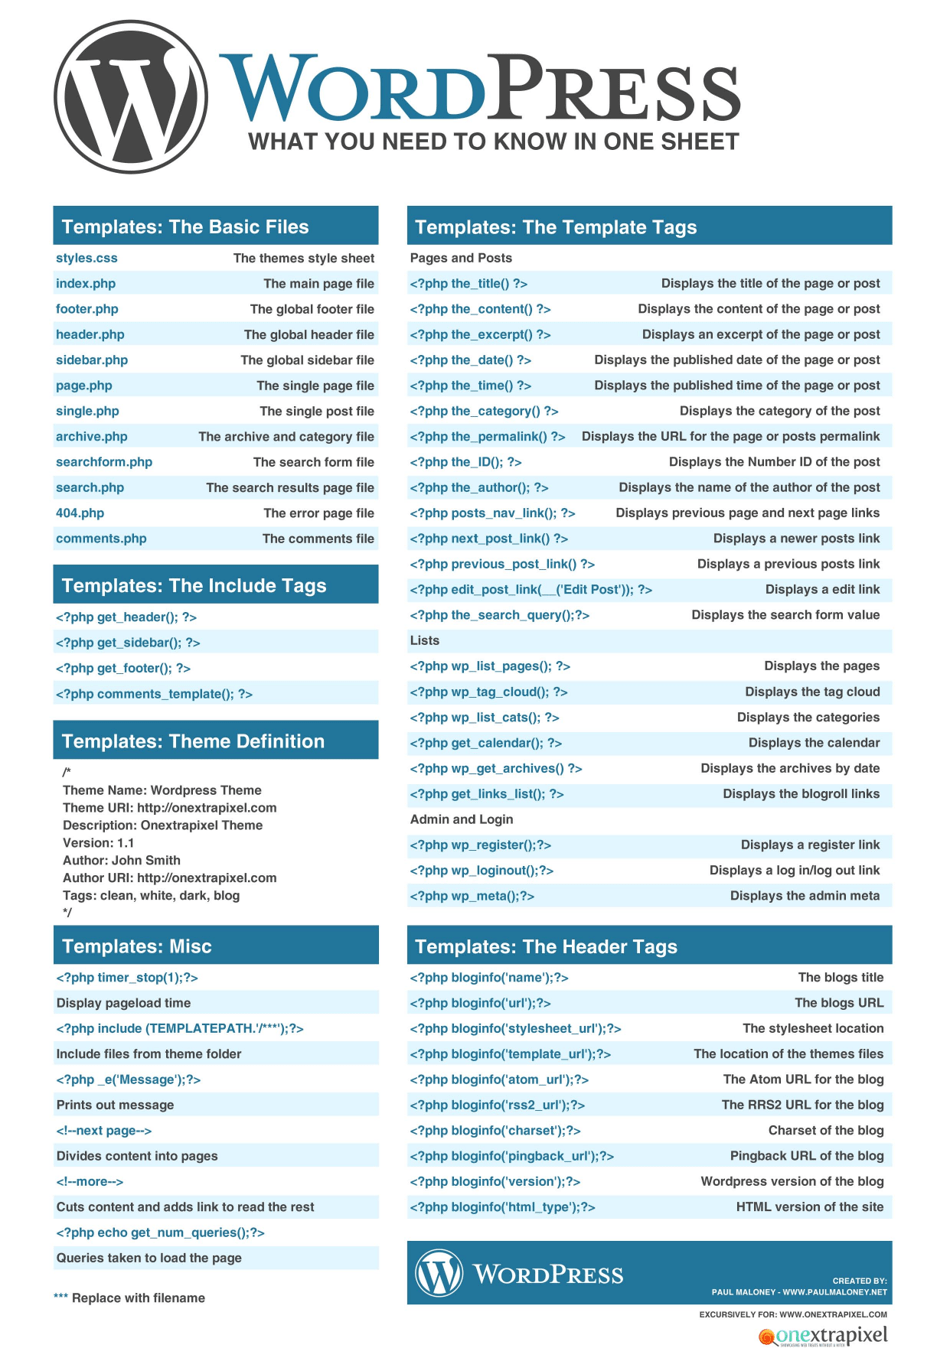 WordPress Cheat Sheet Templates - Free download and printable template